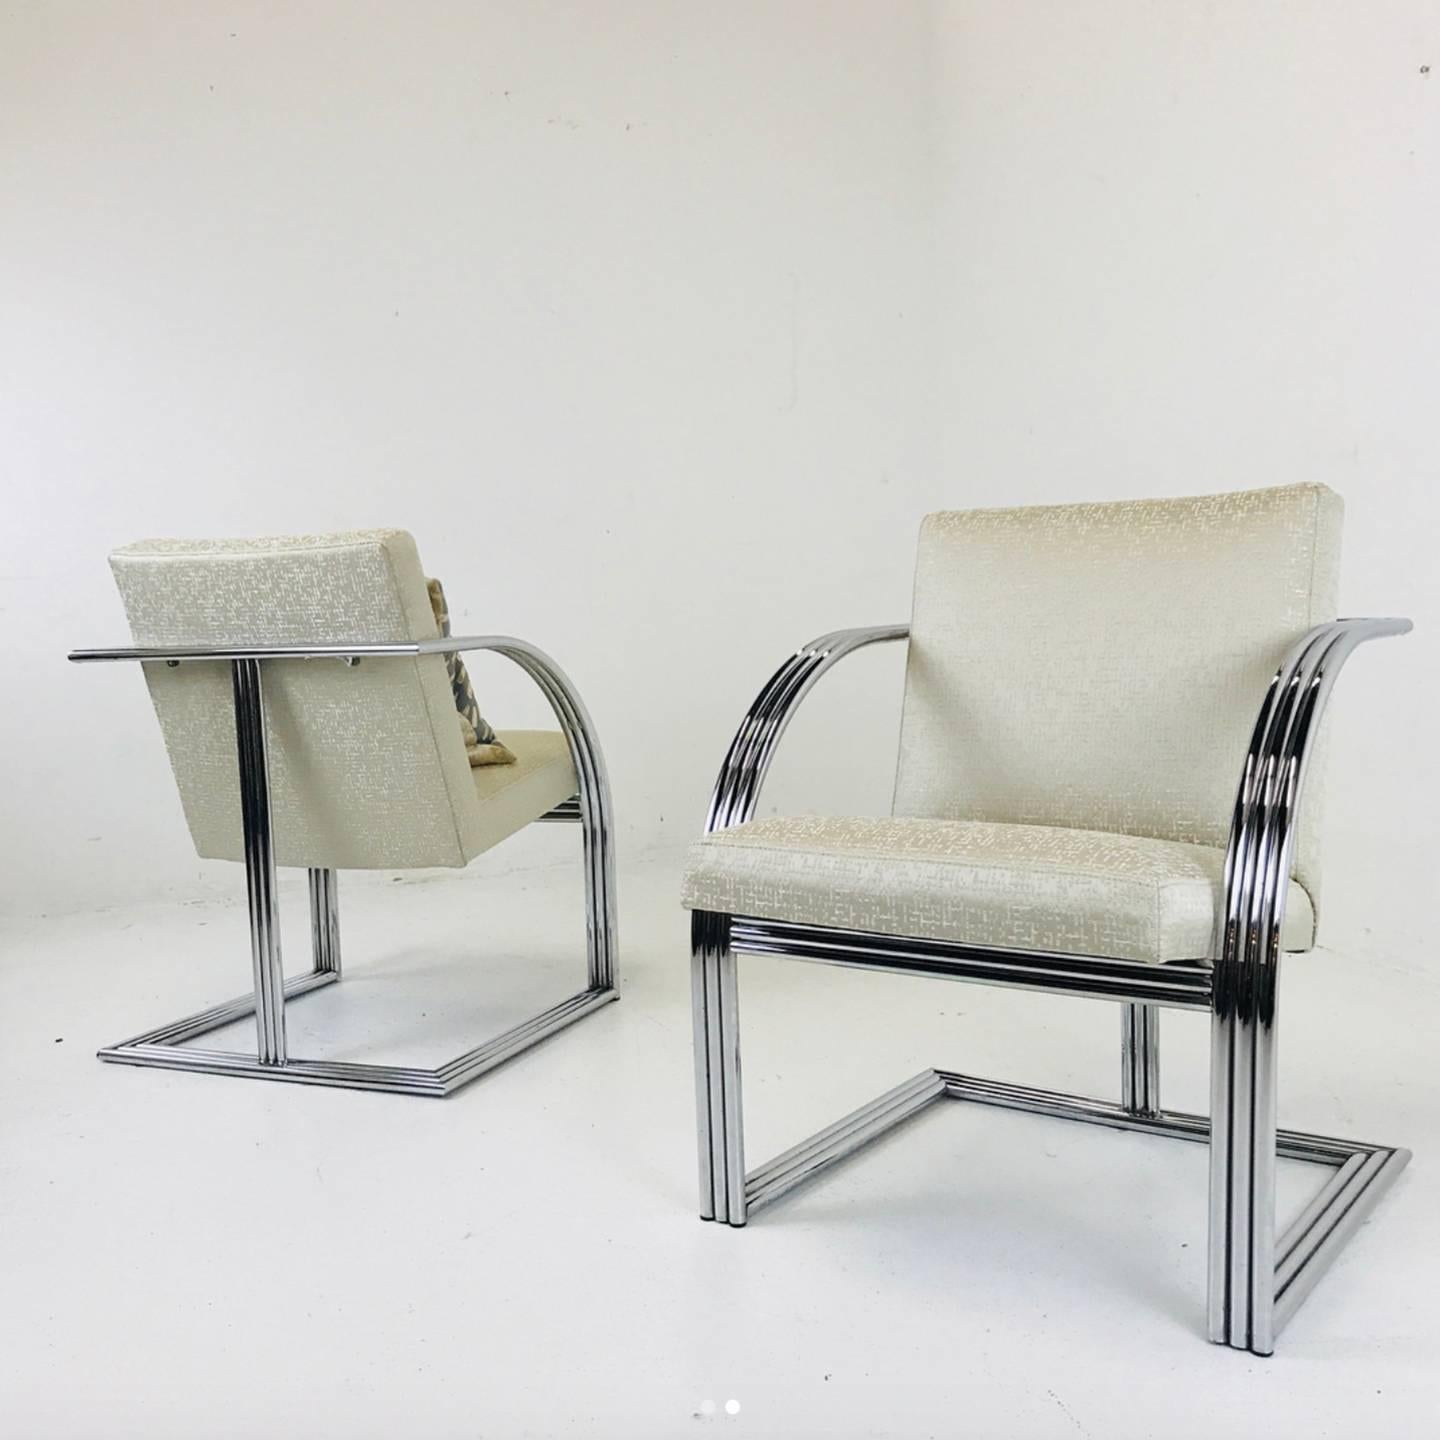 Pair of Milo Baughman T-Back Deco style armchairs. Newly upholstered in a gorgeous textured fabric. The chrome finish is in good vintage condition with some areas needing polishing. (see photos)

Dimensions: 
25